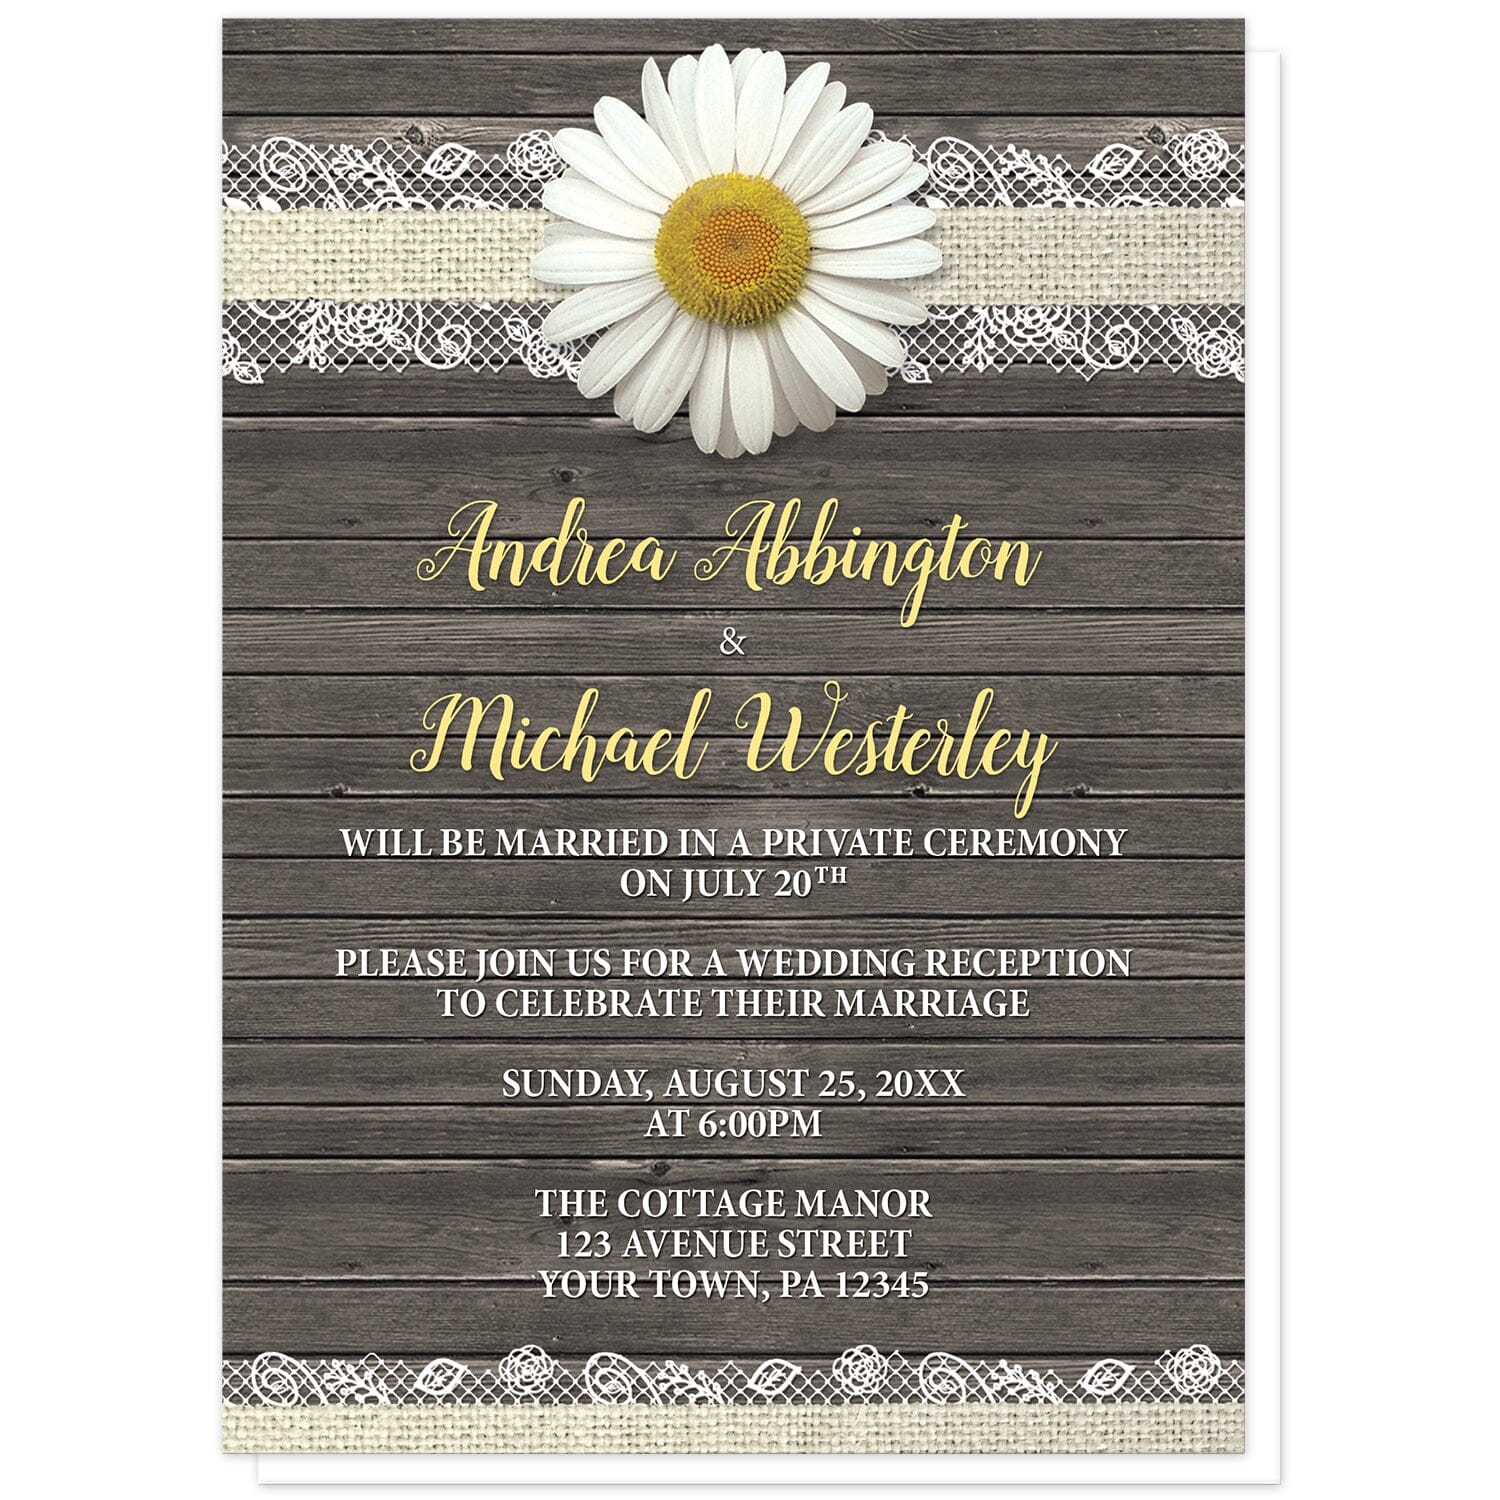 Daisy Burlap and Lace Wood Reception Only Invitations at Artistically Invited. Southern rustic daisy burlap and lace wood reception only invitations with a white daisy flower centered at the top on a burlap and lace ribbon strip illustration, over a brown country wood background. Your personalized post-wedding reception celebration details are custom printed in yellow and white over the wood design.